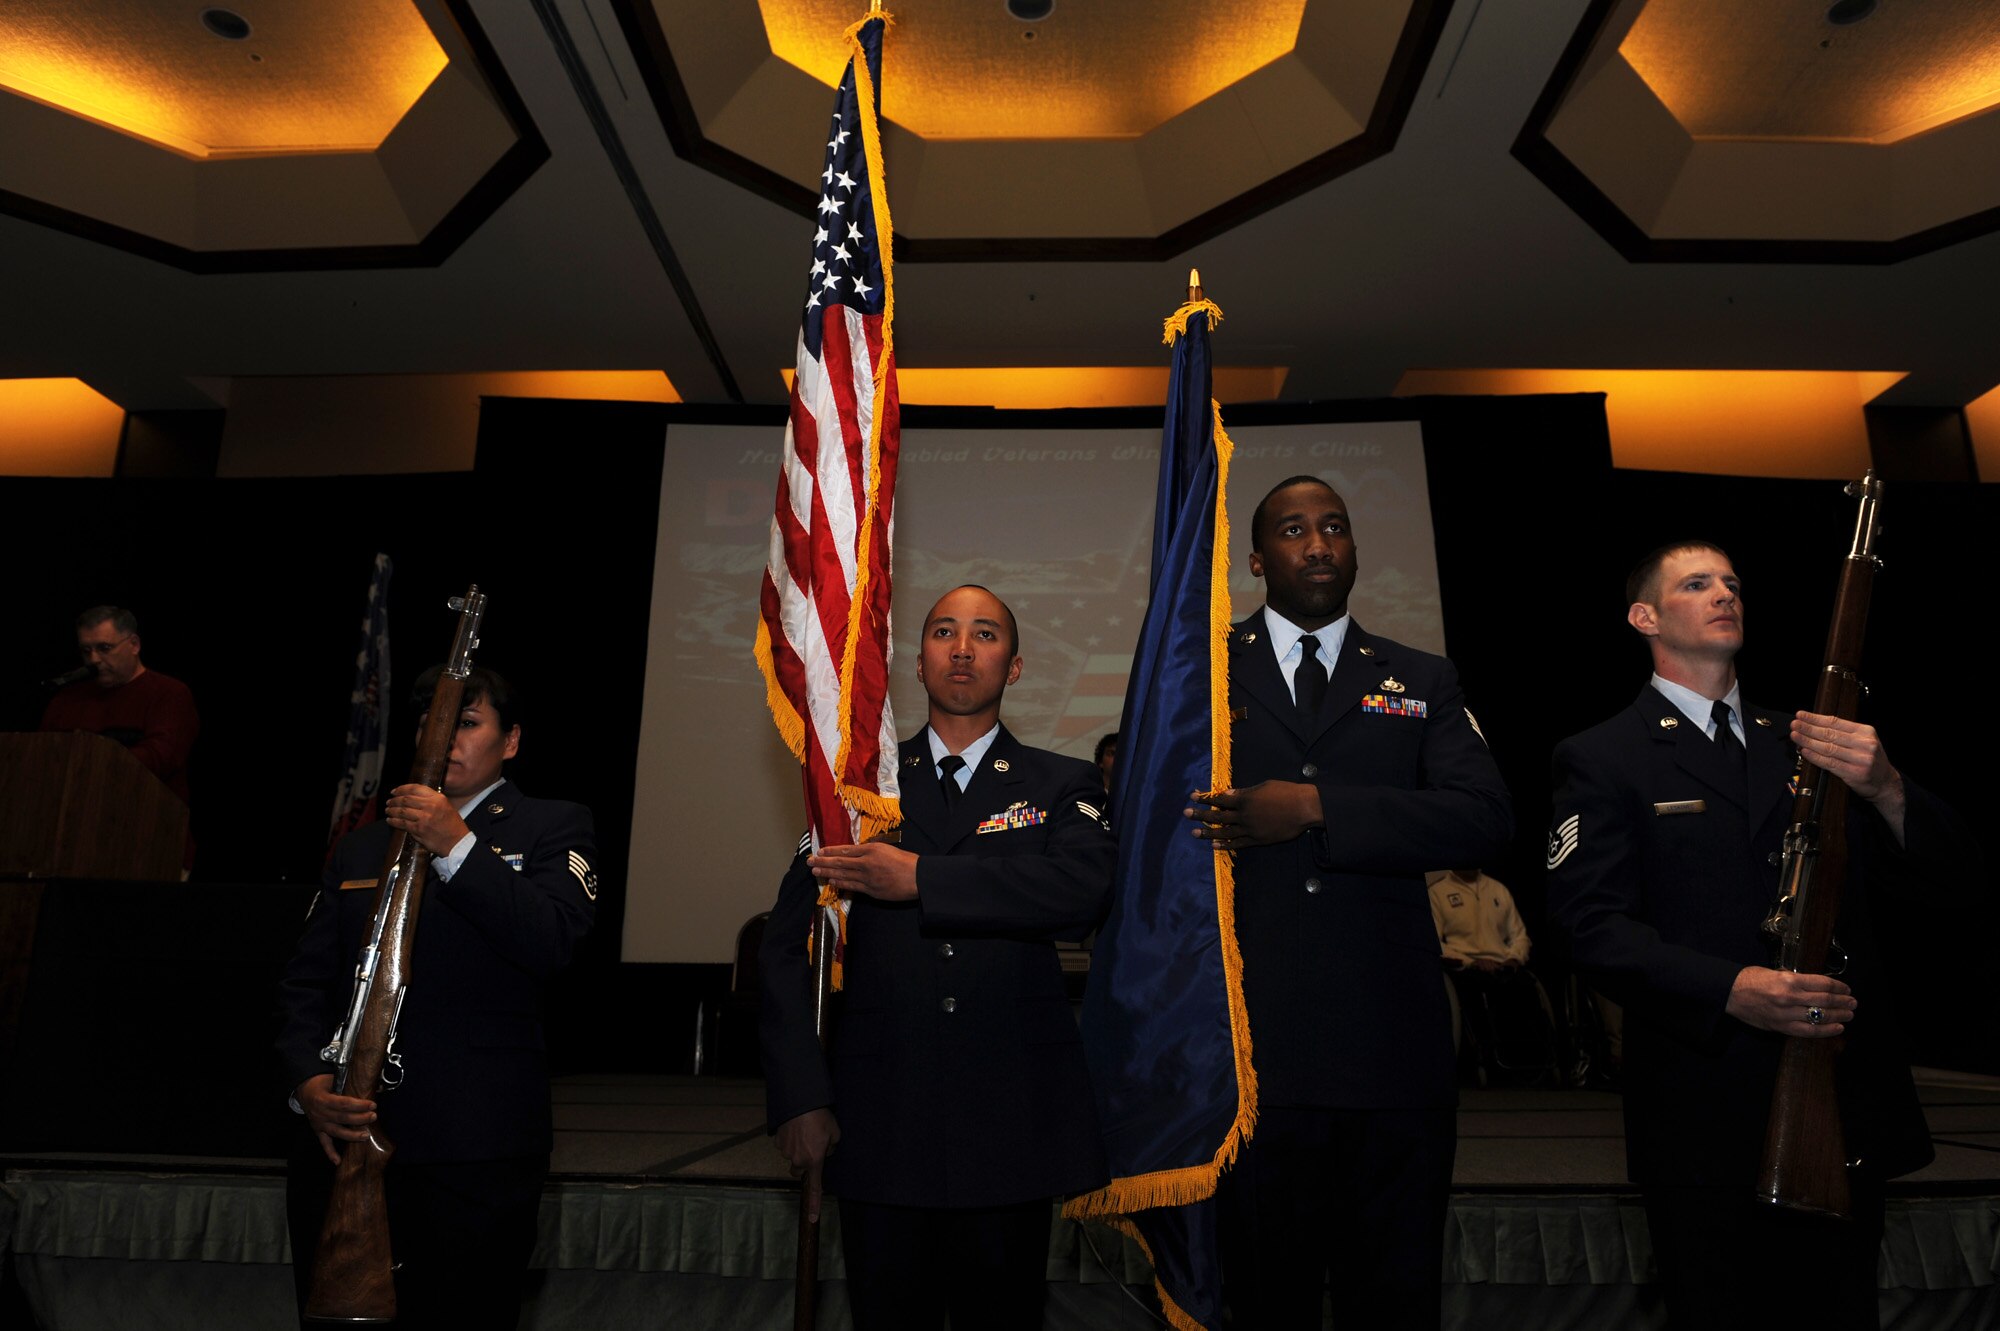 Airmen from Luke Air Force Base, Ariz., post the colors during the opening ceremony March 28, 2010, for the 24th National Disabled American Veterans Winter Sports Clinic in Snowmass Village, Colo. The event is sponsored by the Department of Veterans Affairs and Disabled American Veterans. (U.S. Air Force photo/Staff Sgt. Desiree N. Palacios)